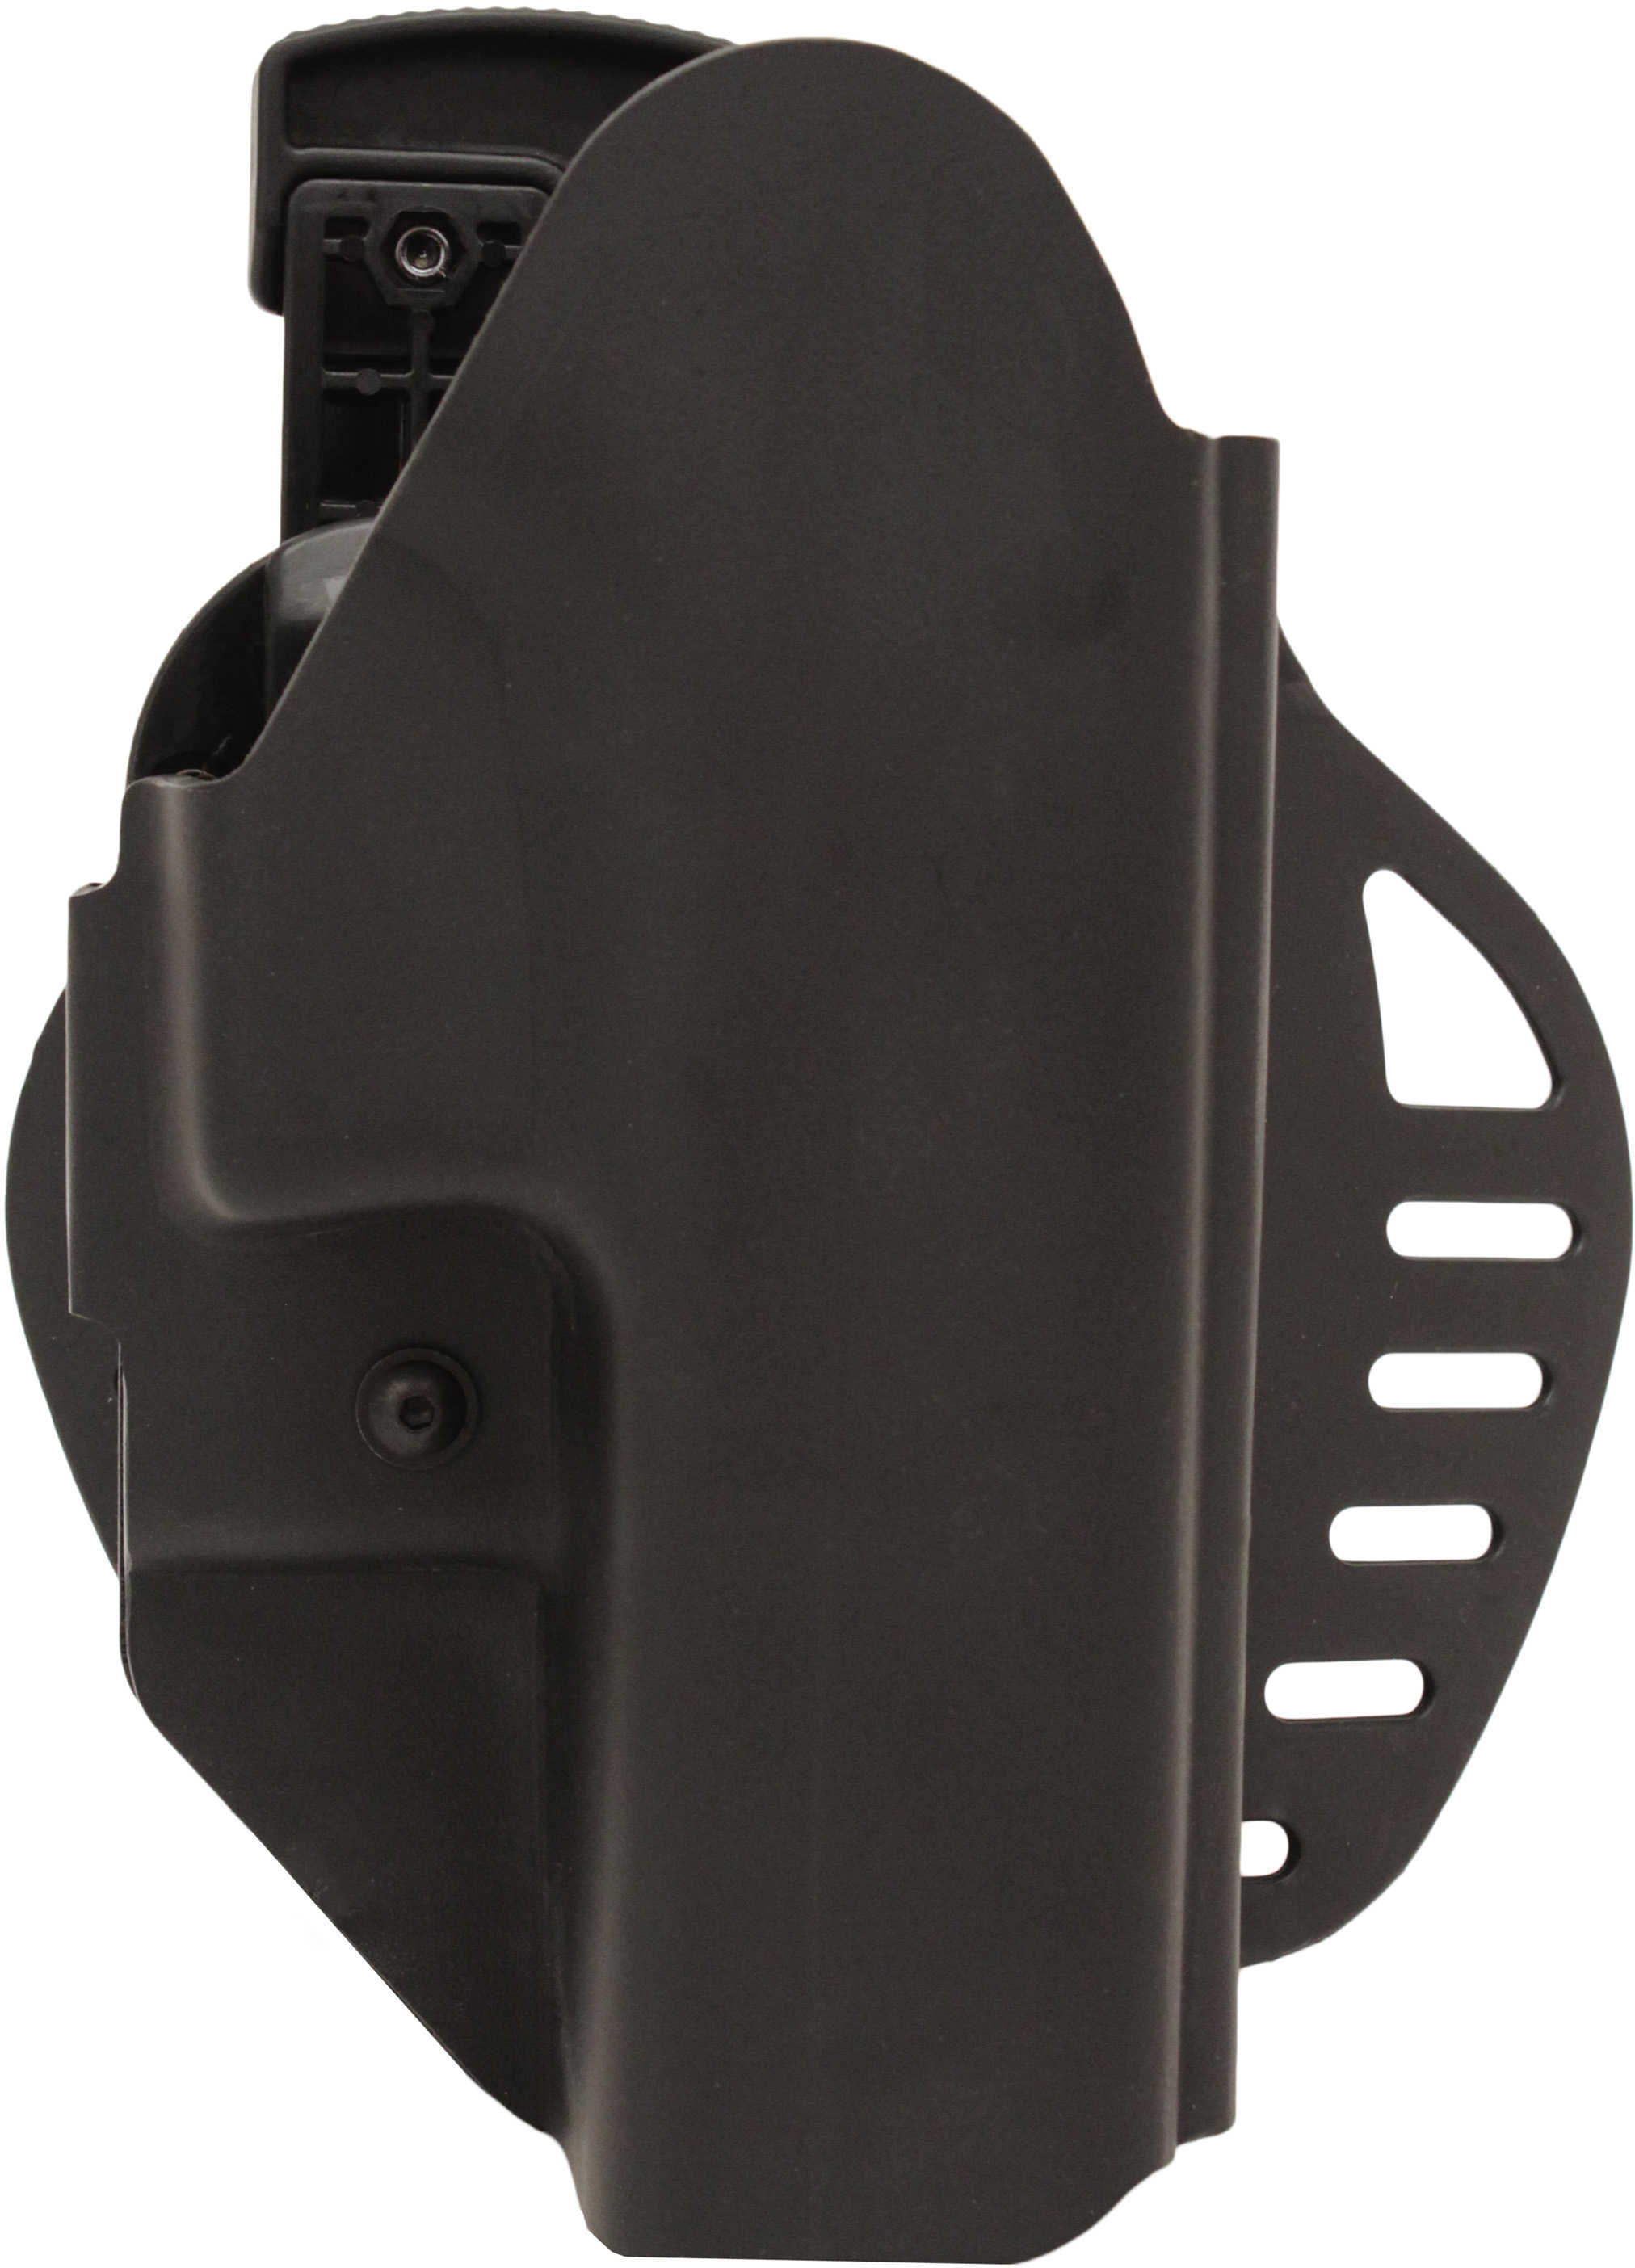 Hogue ARS Stage 1 Carry Holster Black for Glock 20/21 RH